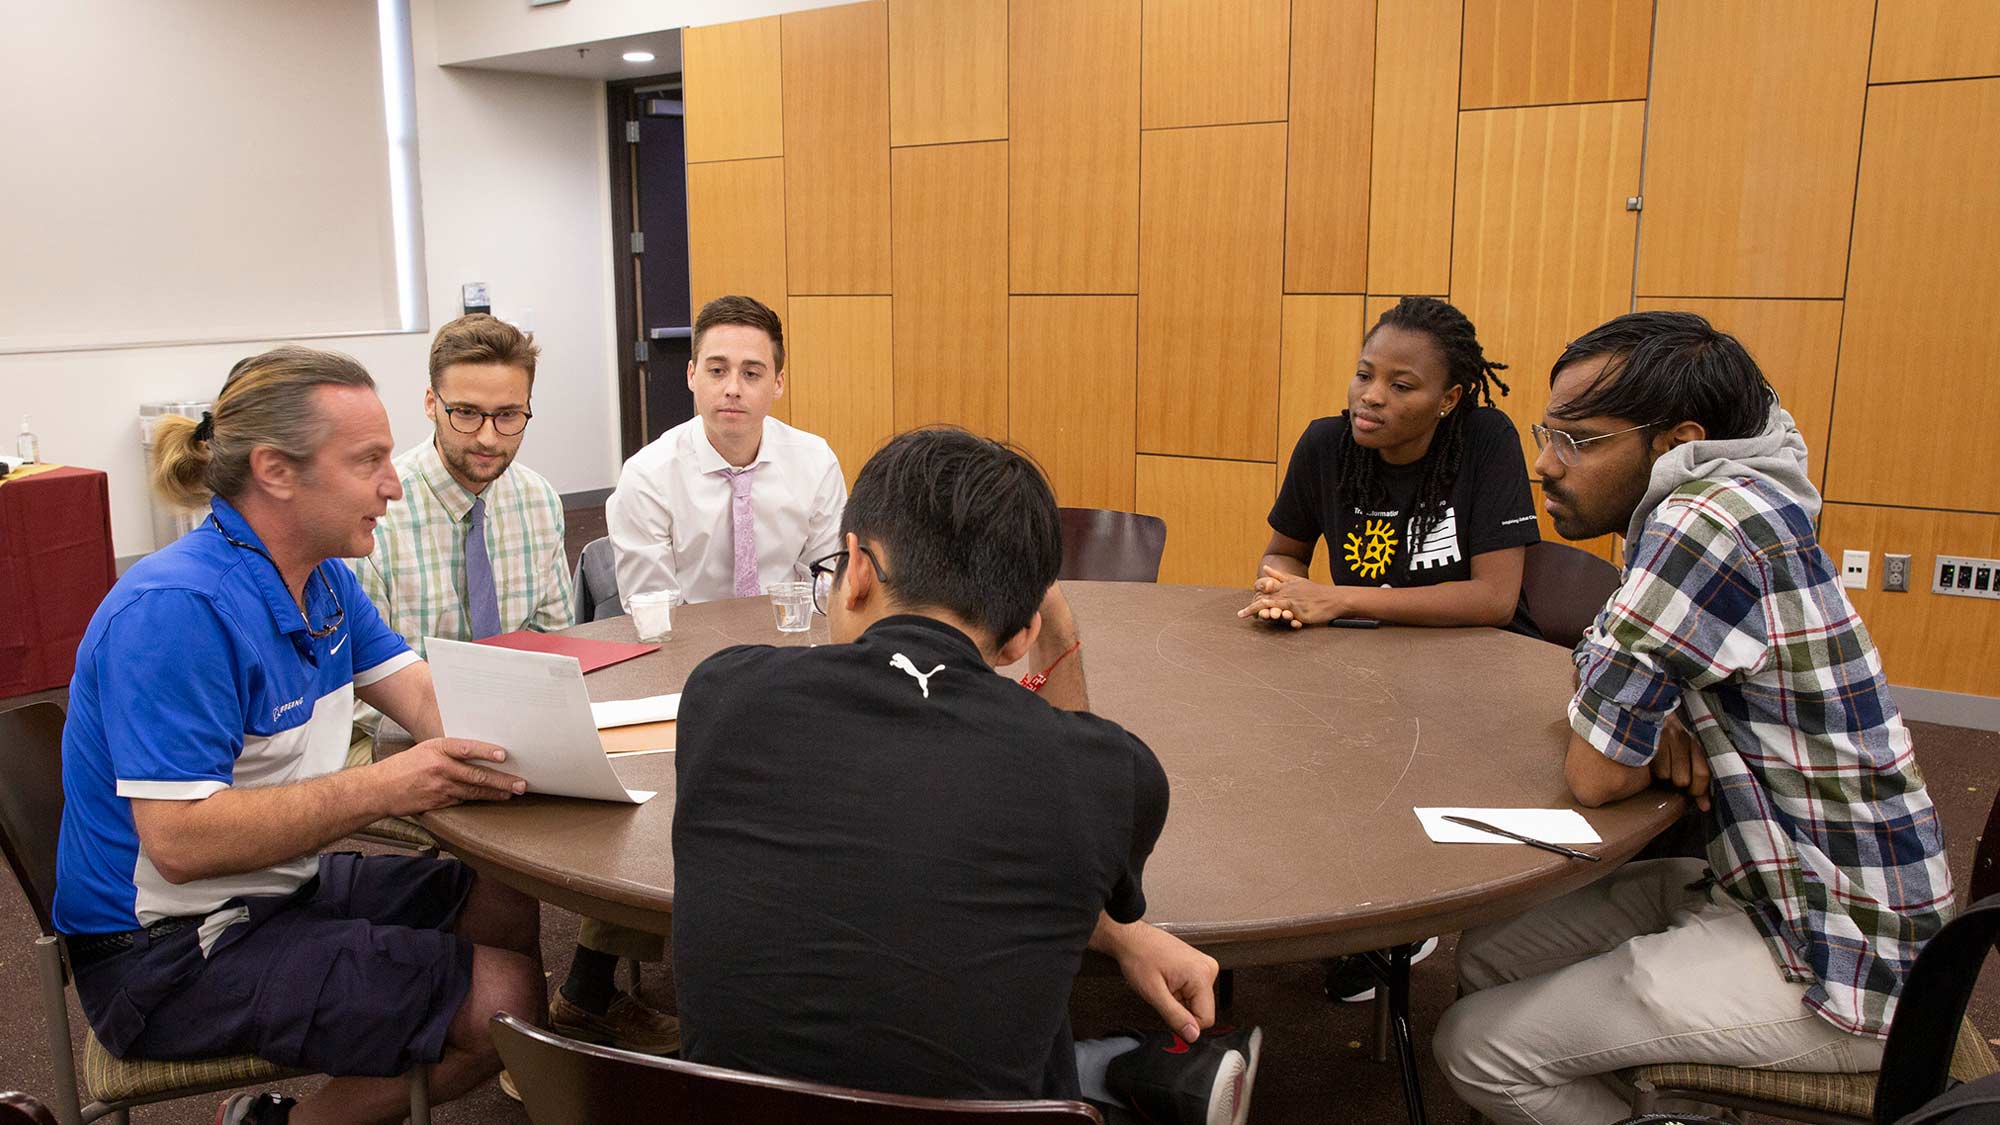 A group of students learns from an engineer about the career field while seated around a table